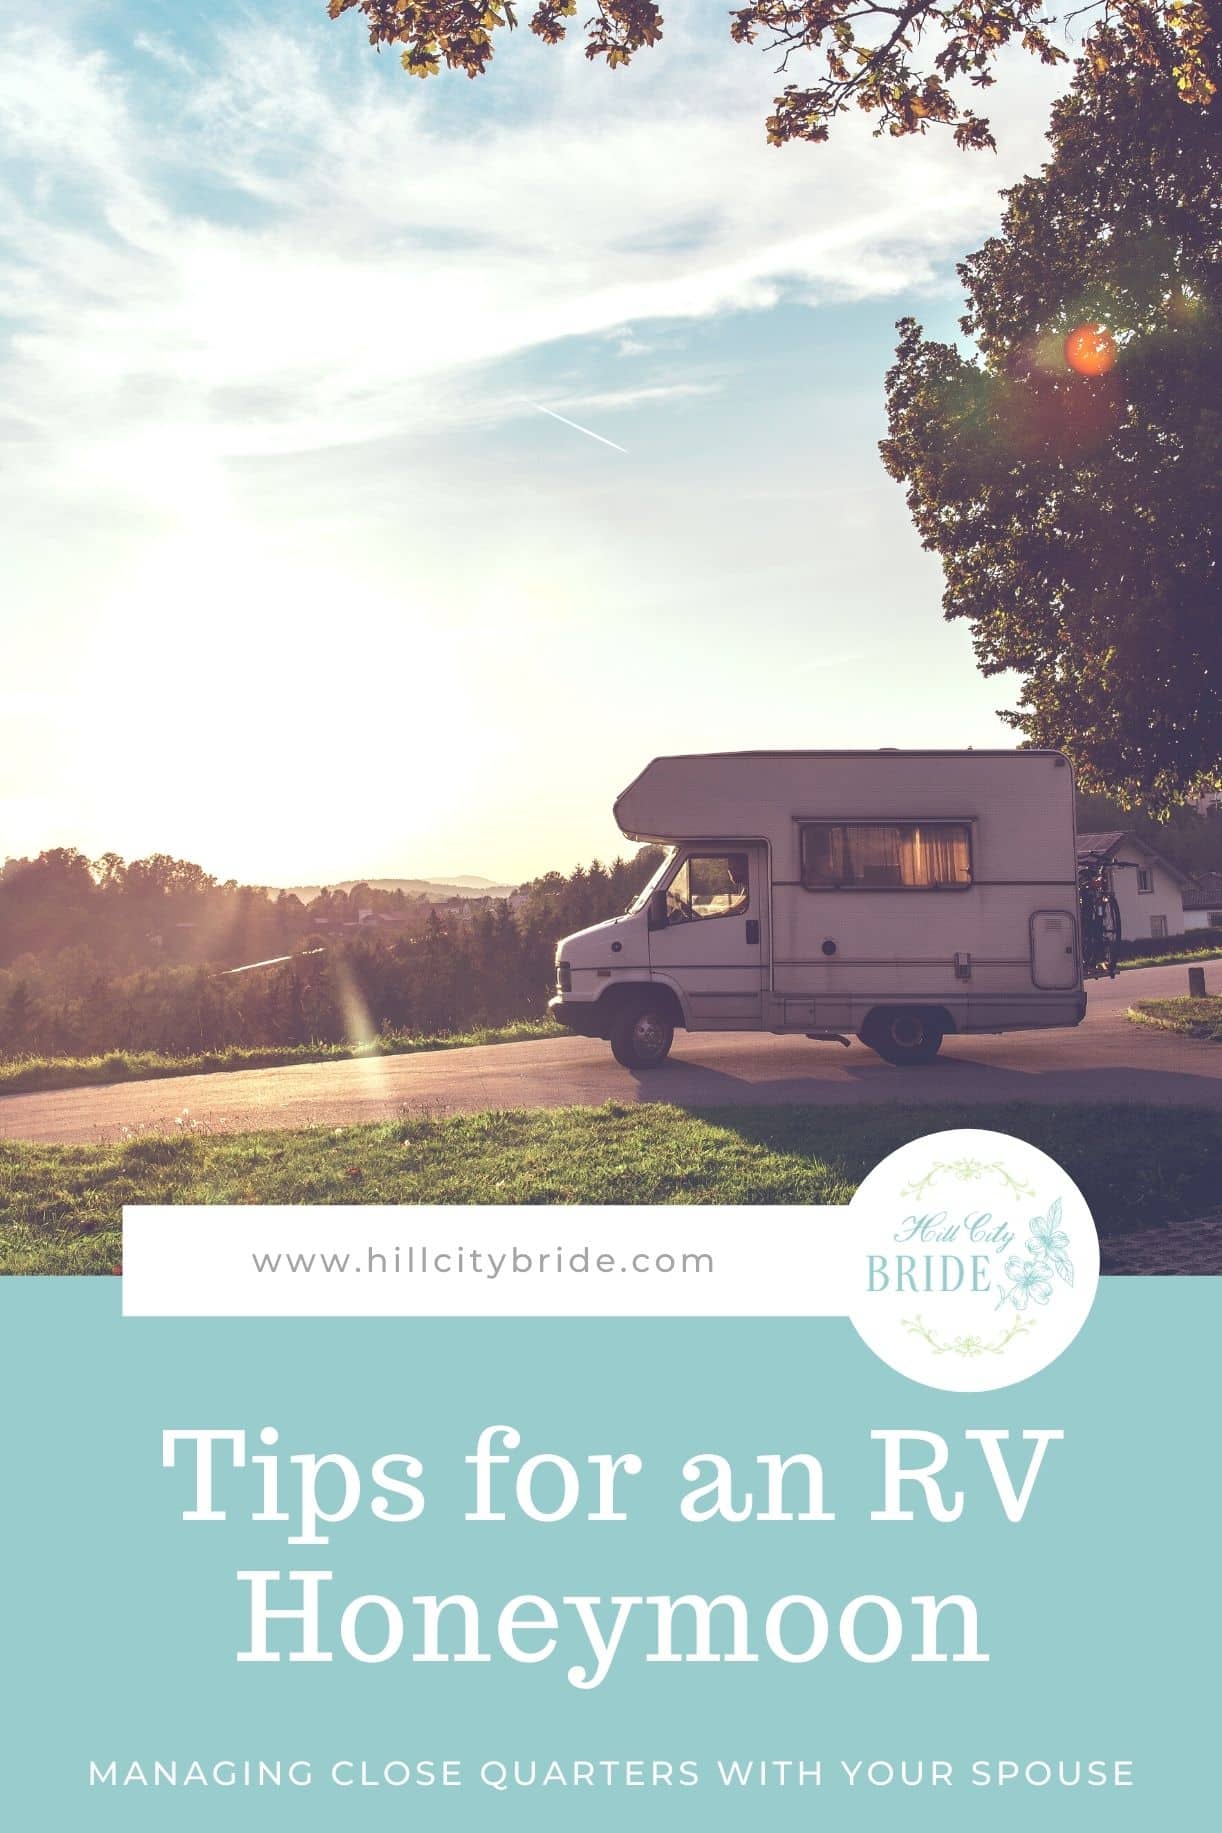 Living in an RV Full Time on a Honeymoon